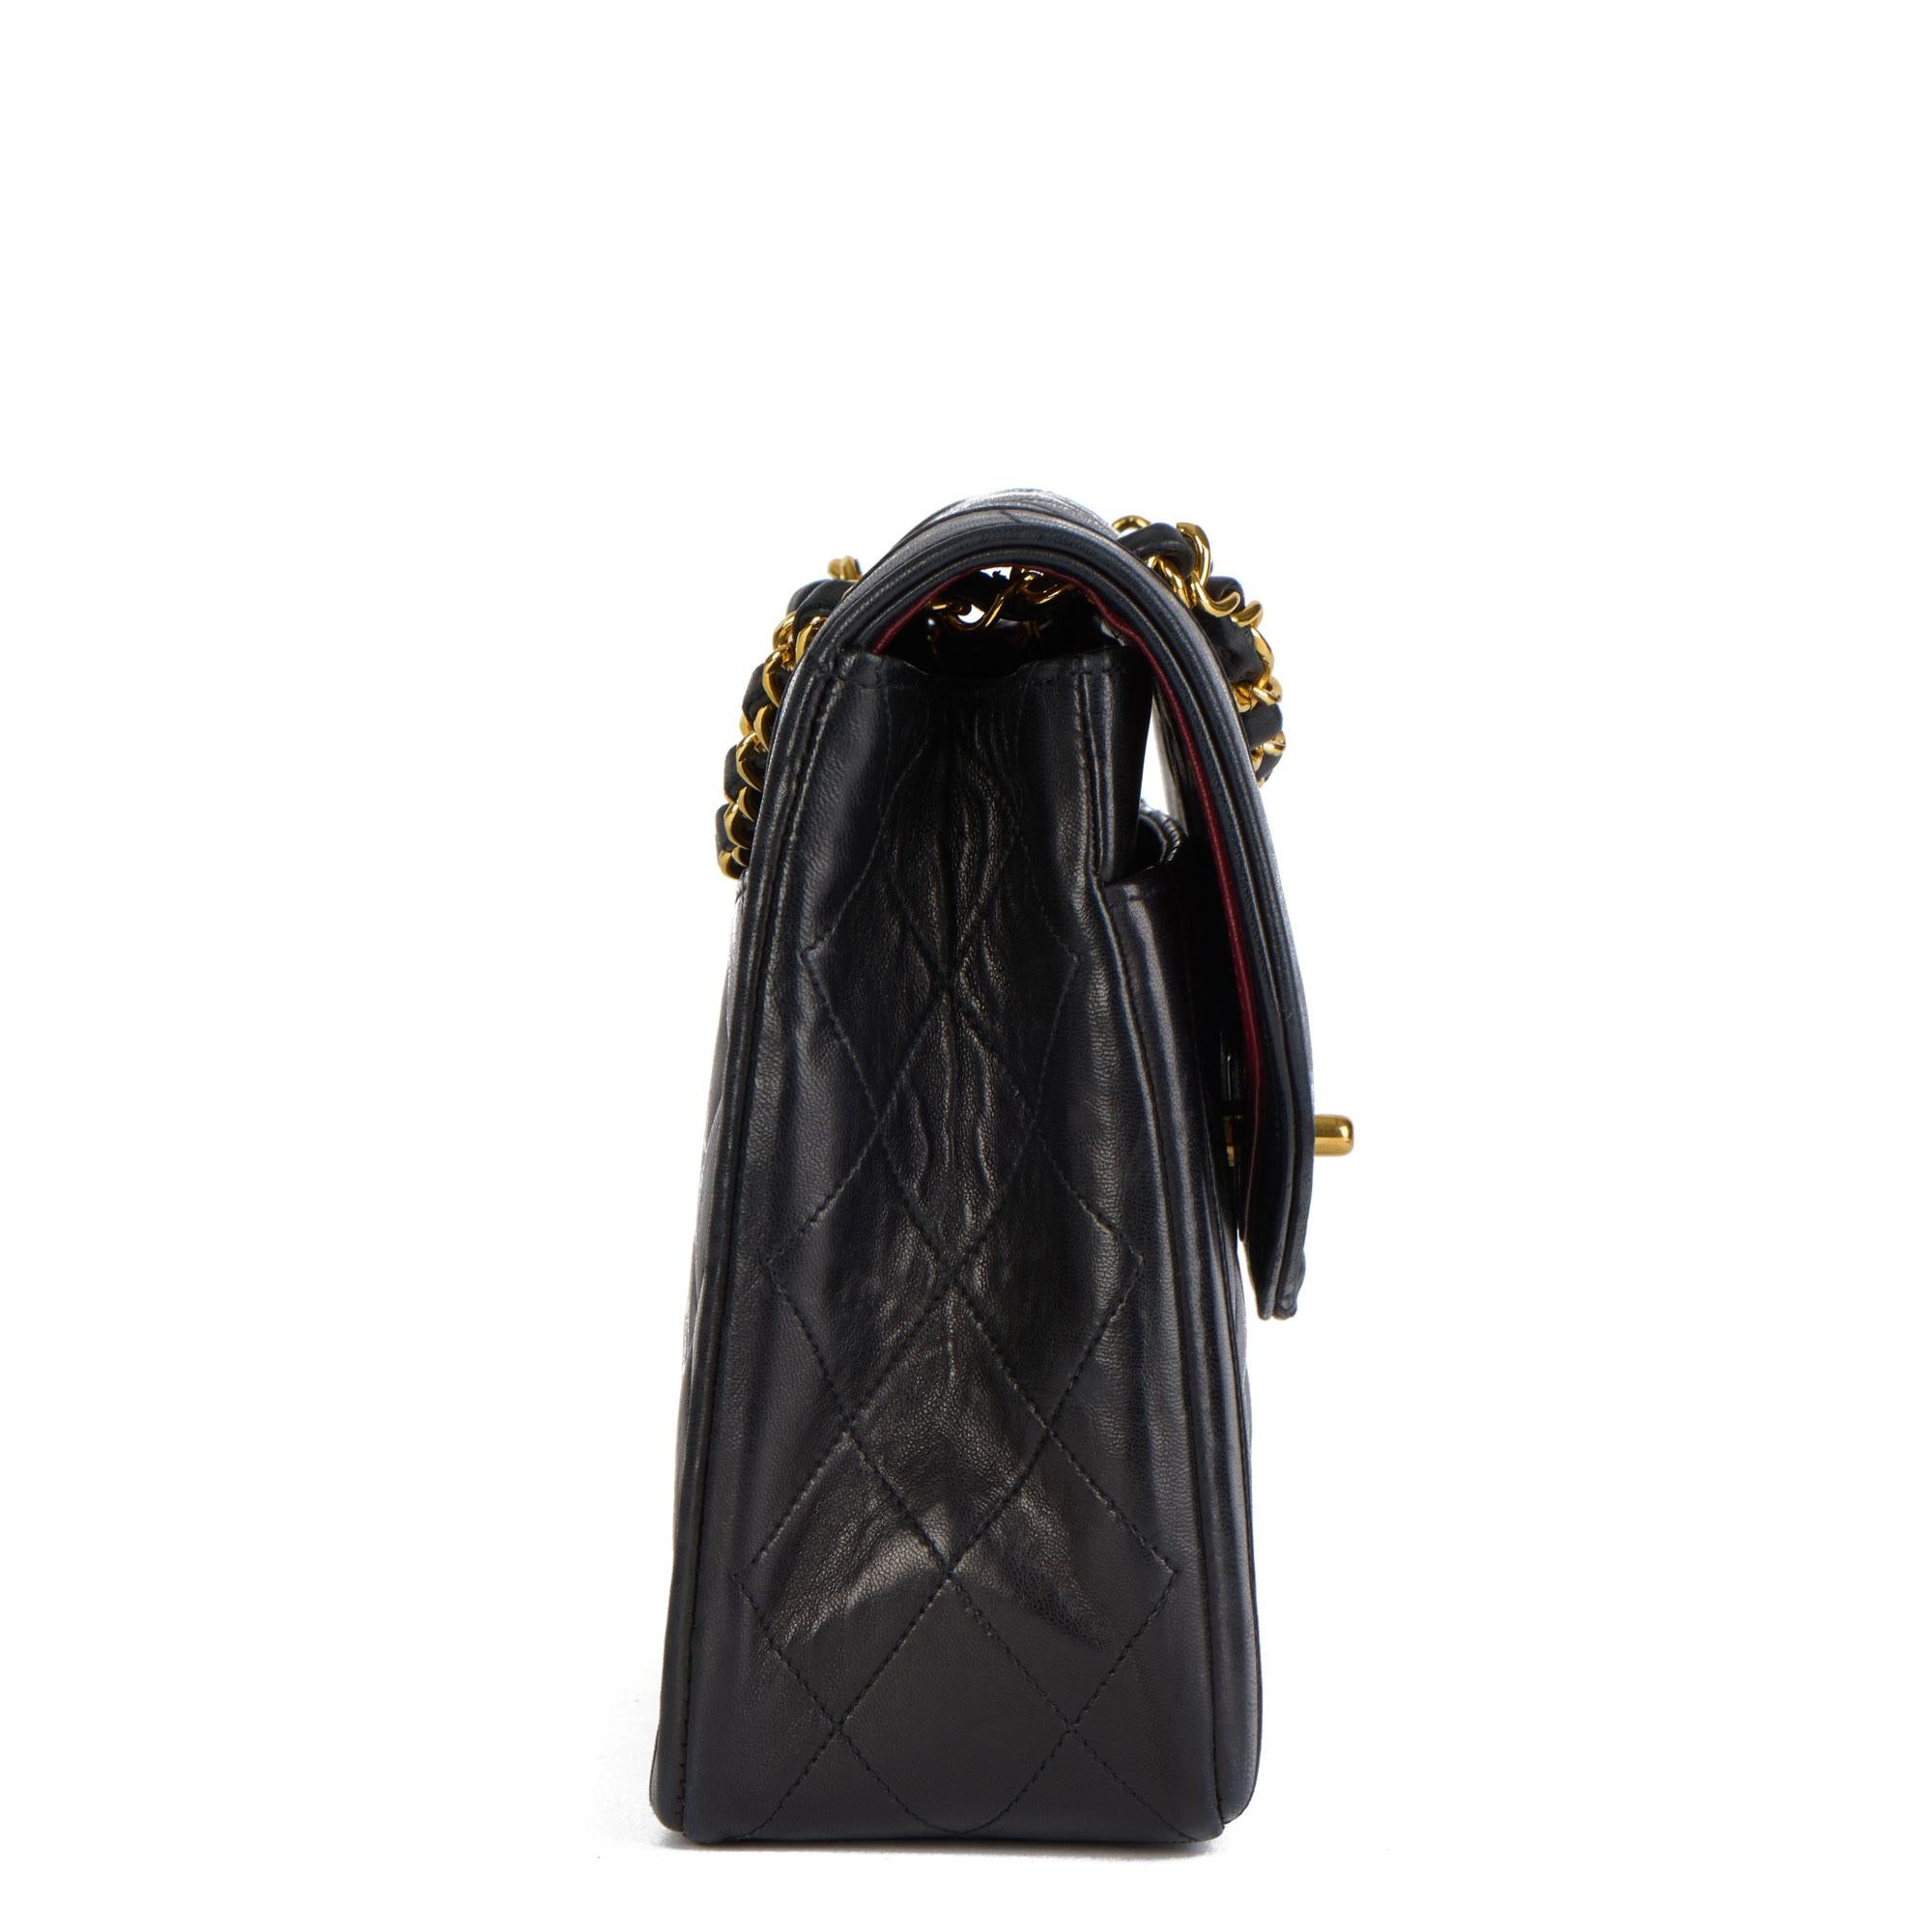 Xupes Reference: HB4194
Serial Number: 2002745
Age (Circa): 1992
Accompanied By: Chanel Dust Bag, Authenticity Card
Authenticity Details: Authenticity Card, Serial Sticker (Made in France) 
Gender: Ladies
Type: Shoulder

Colour: Black
Hardware: Gold